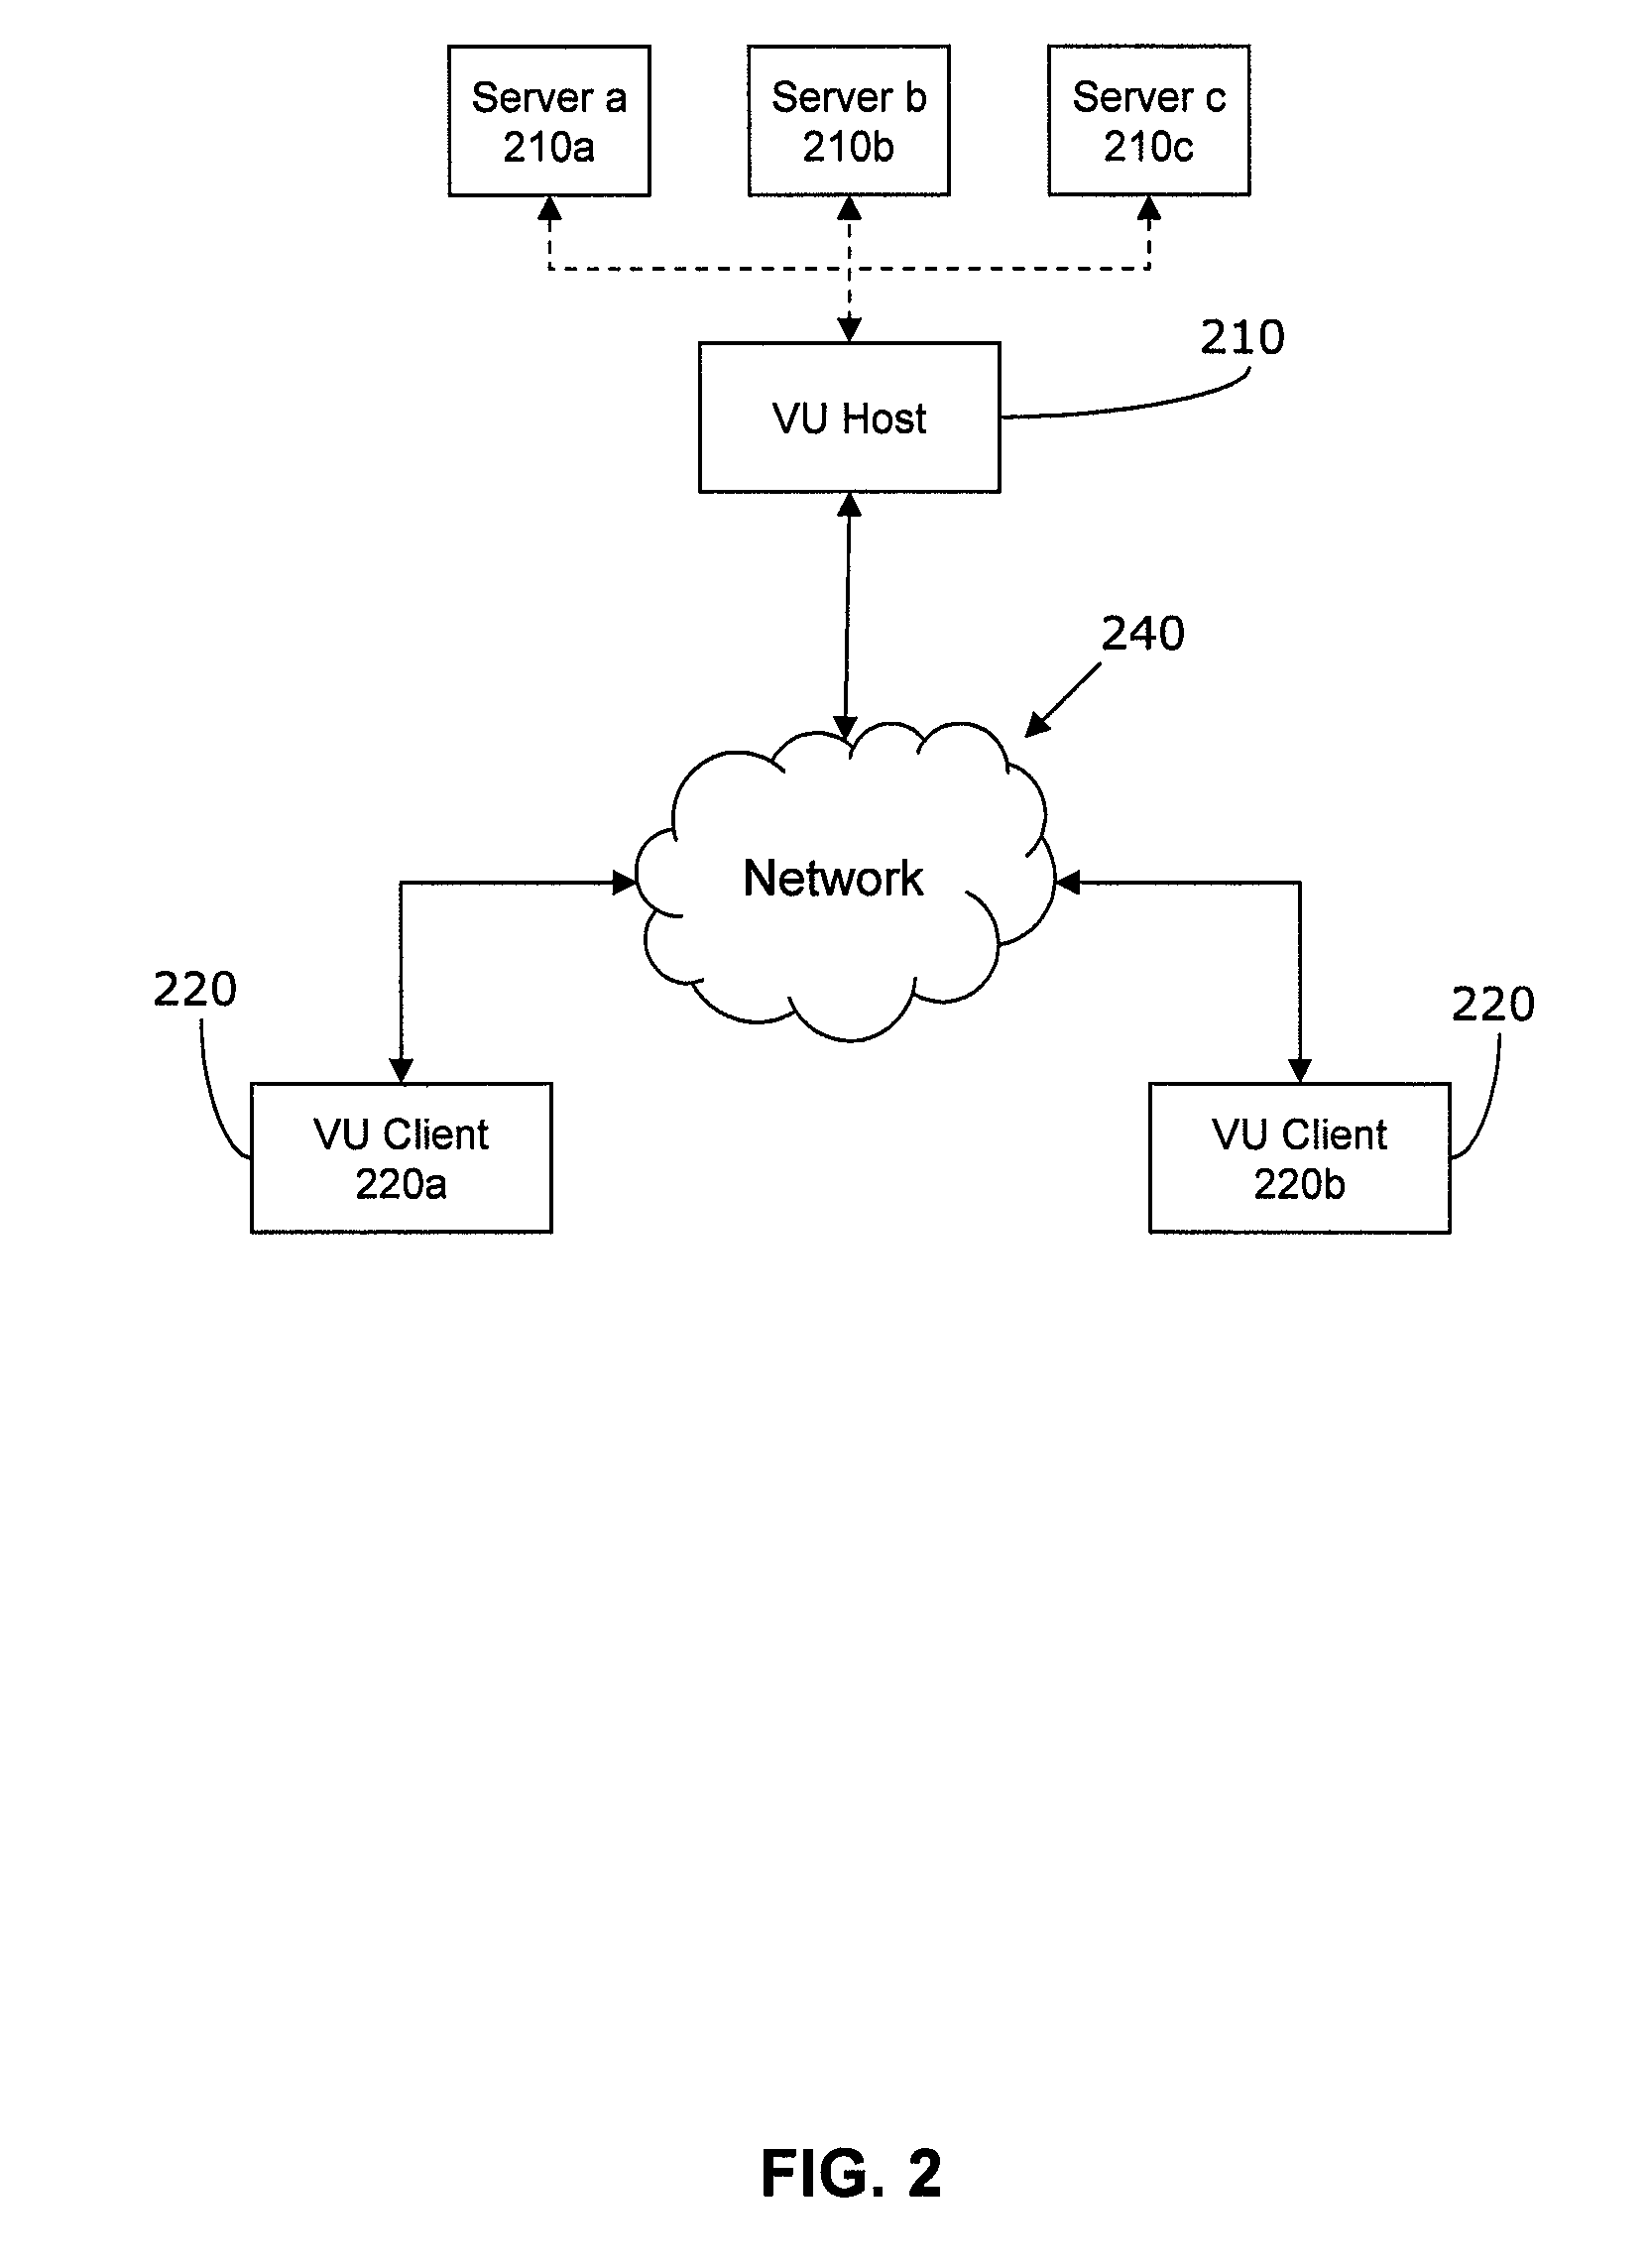 Use of information channels to provide communications in a virtual environment